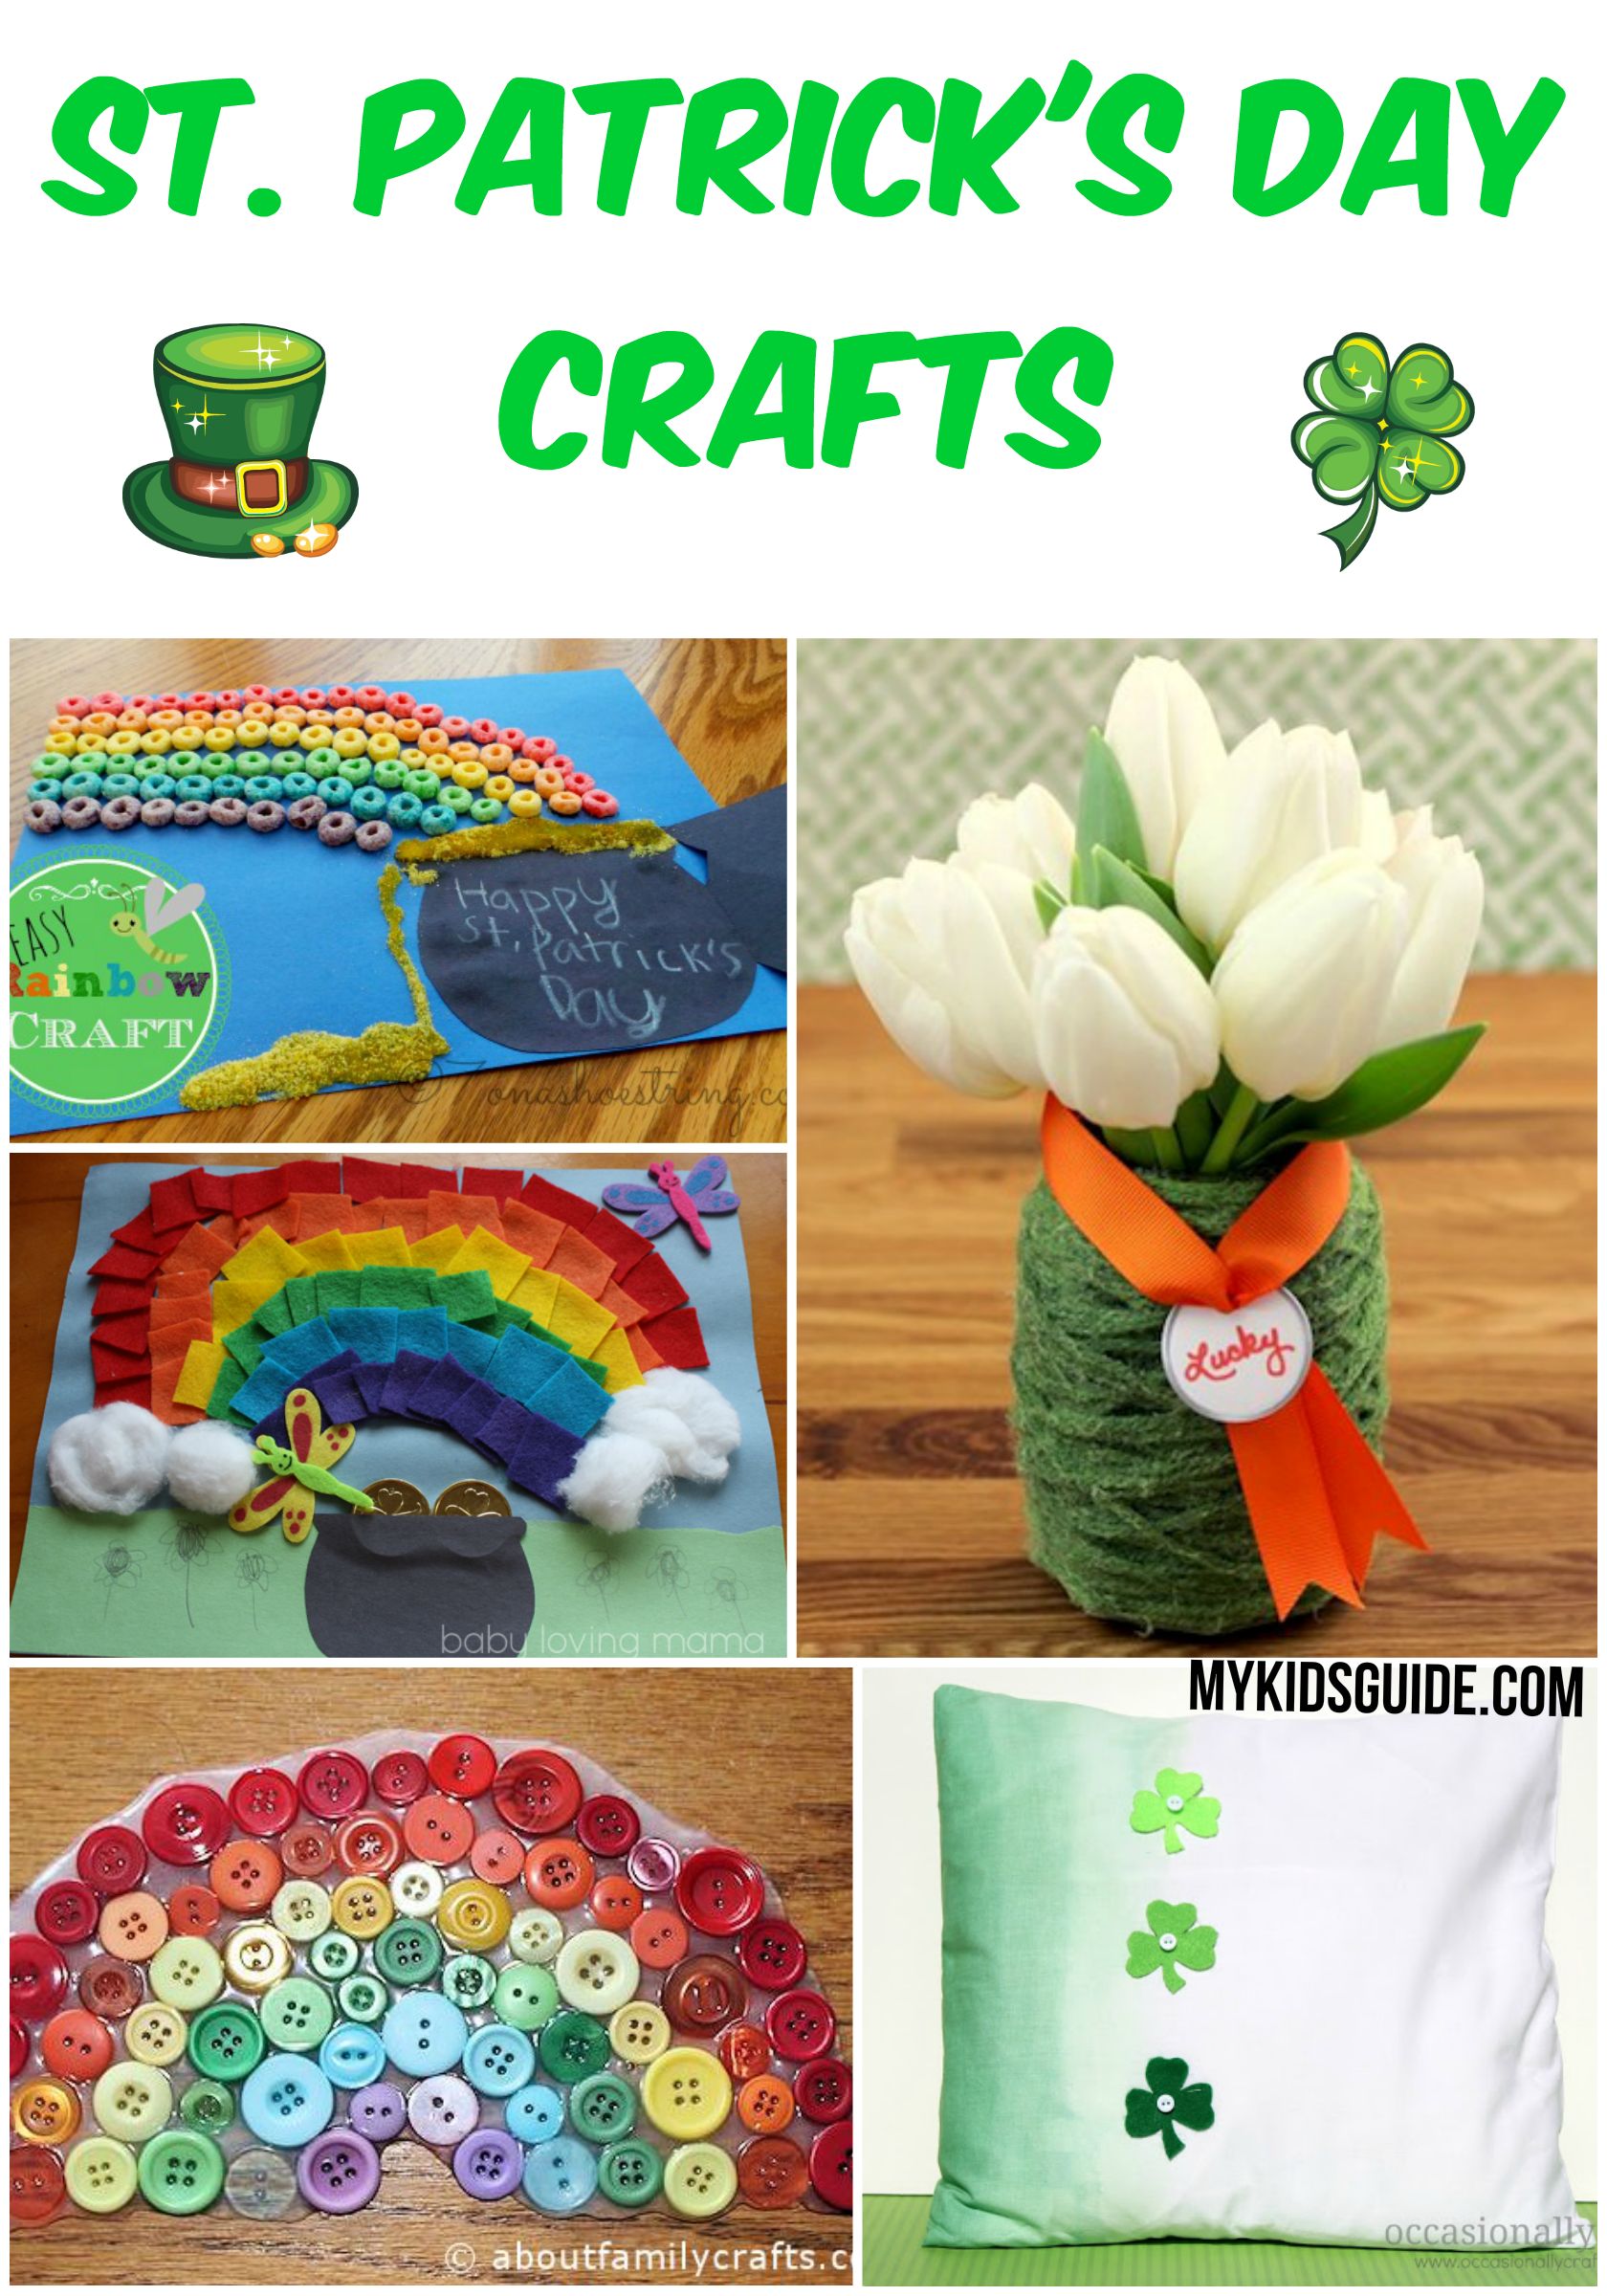 Everyone loves to claim they are Irish on St. Patrick's Day and these 11 Easy St. Patrick's Day Crafts are perfect for your whole family to get involved in celebrating.